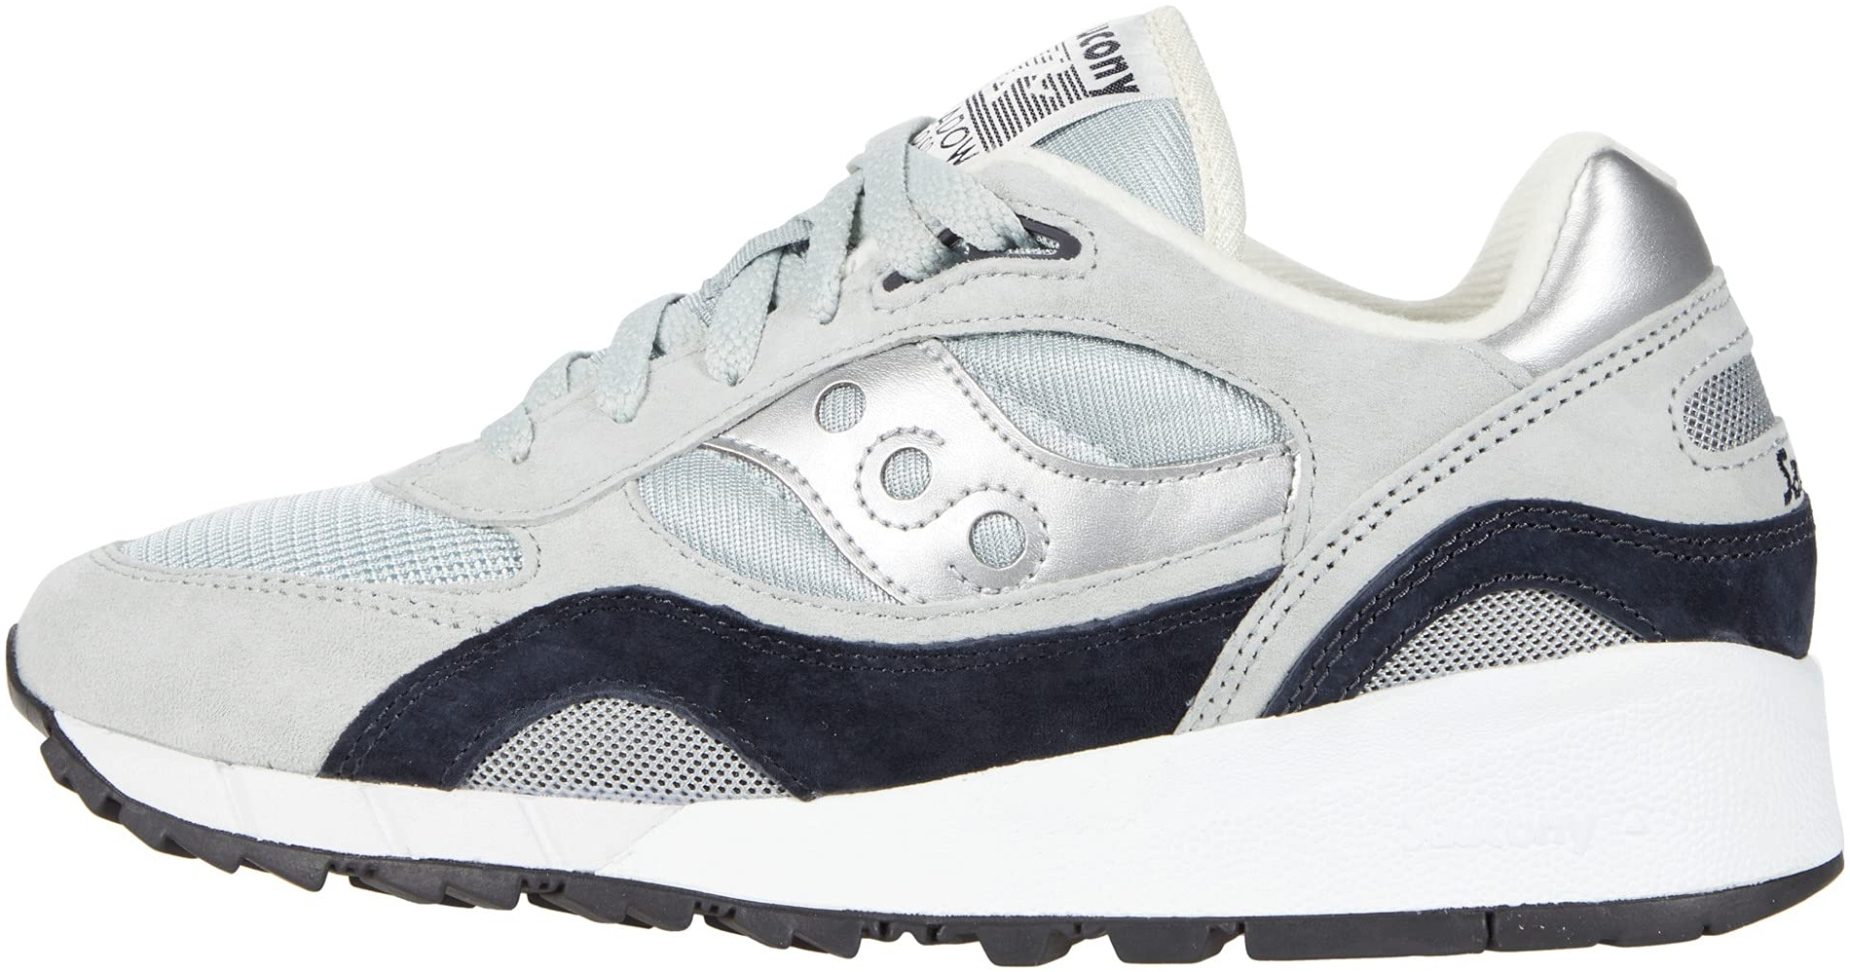 Saucony Shadow 6000 sneakers in 10+ colors (only $50) | RunRepeat